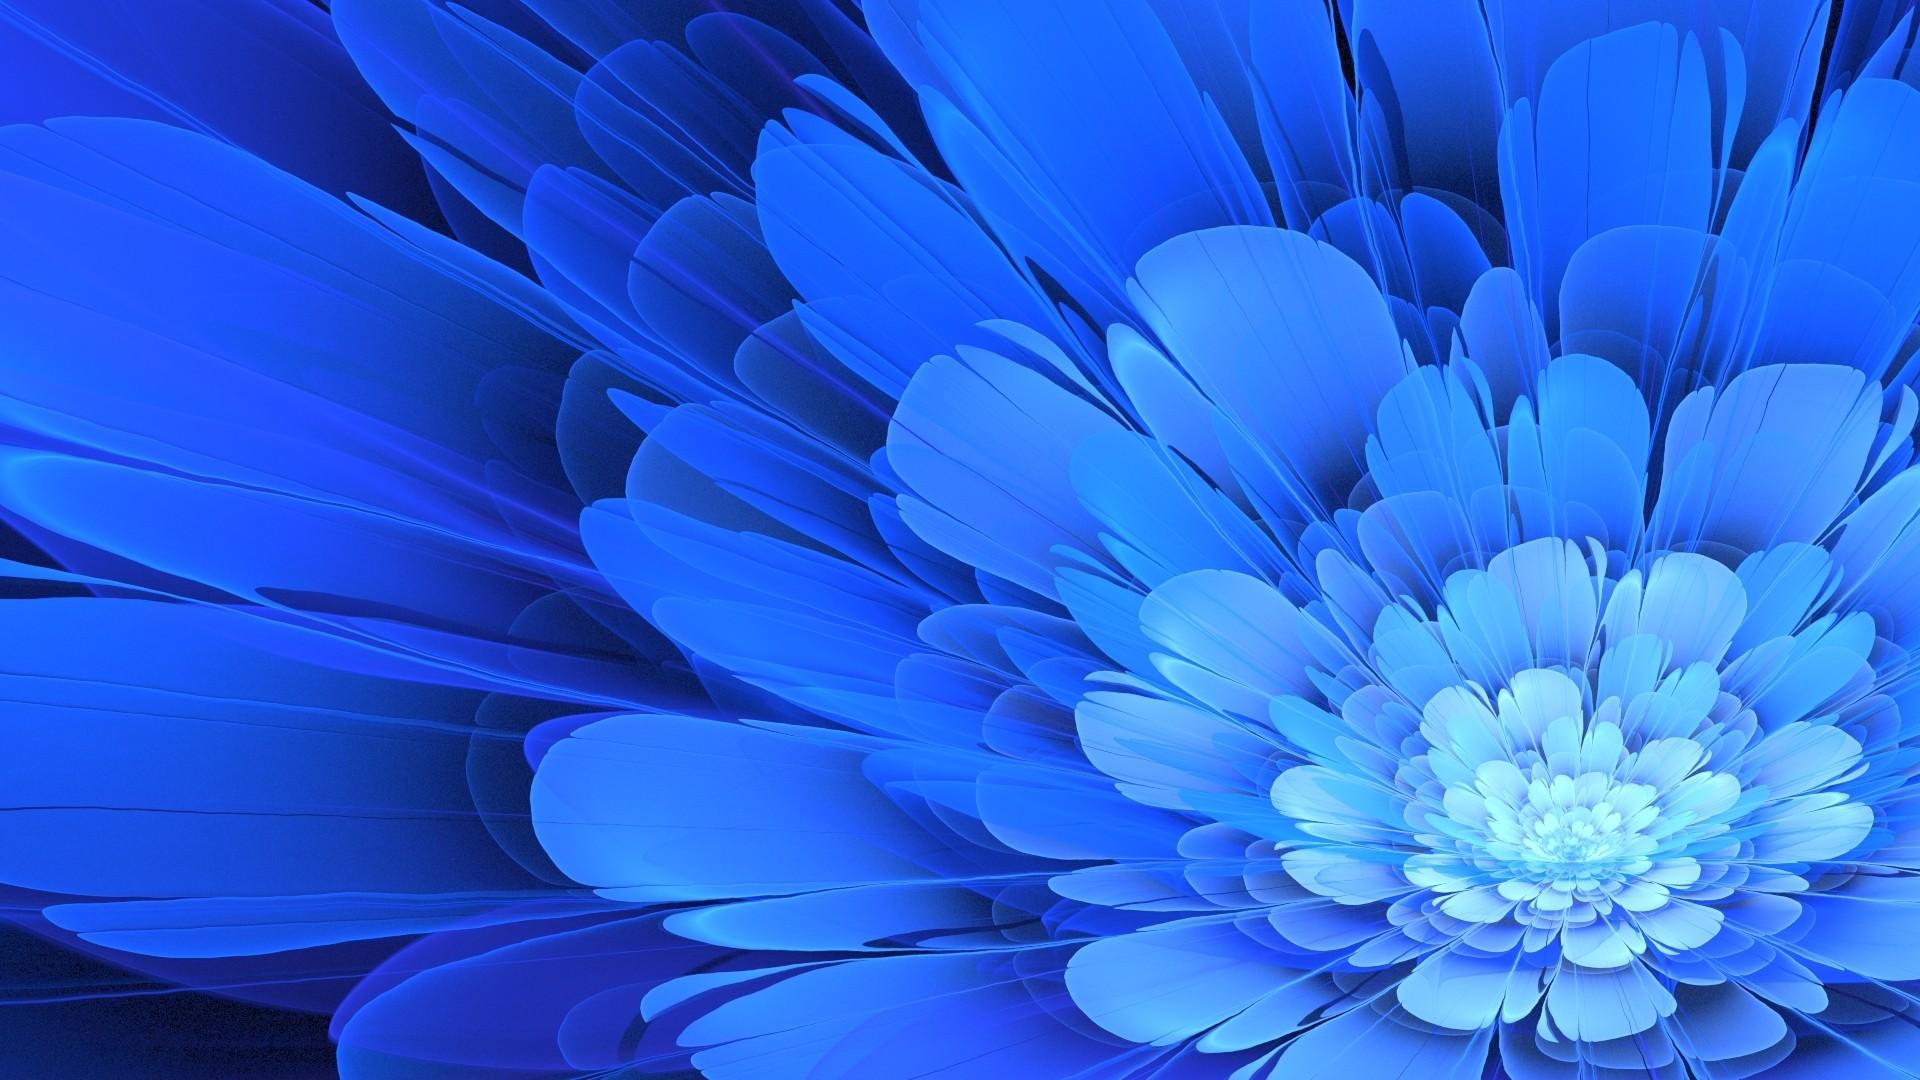 1920 x 1080 · jpeg - Blue Flower Wallpapers: 26 Images, Nature Category